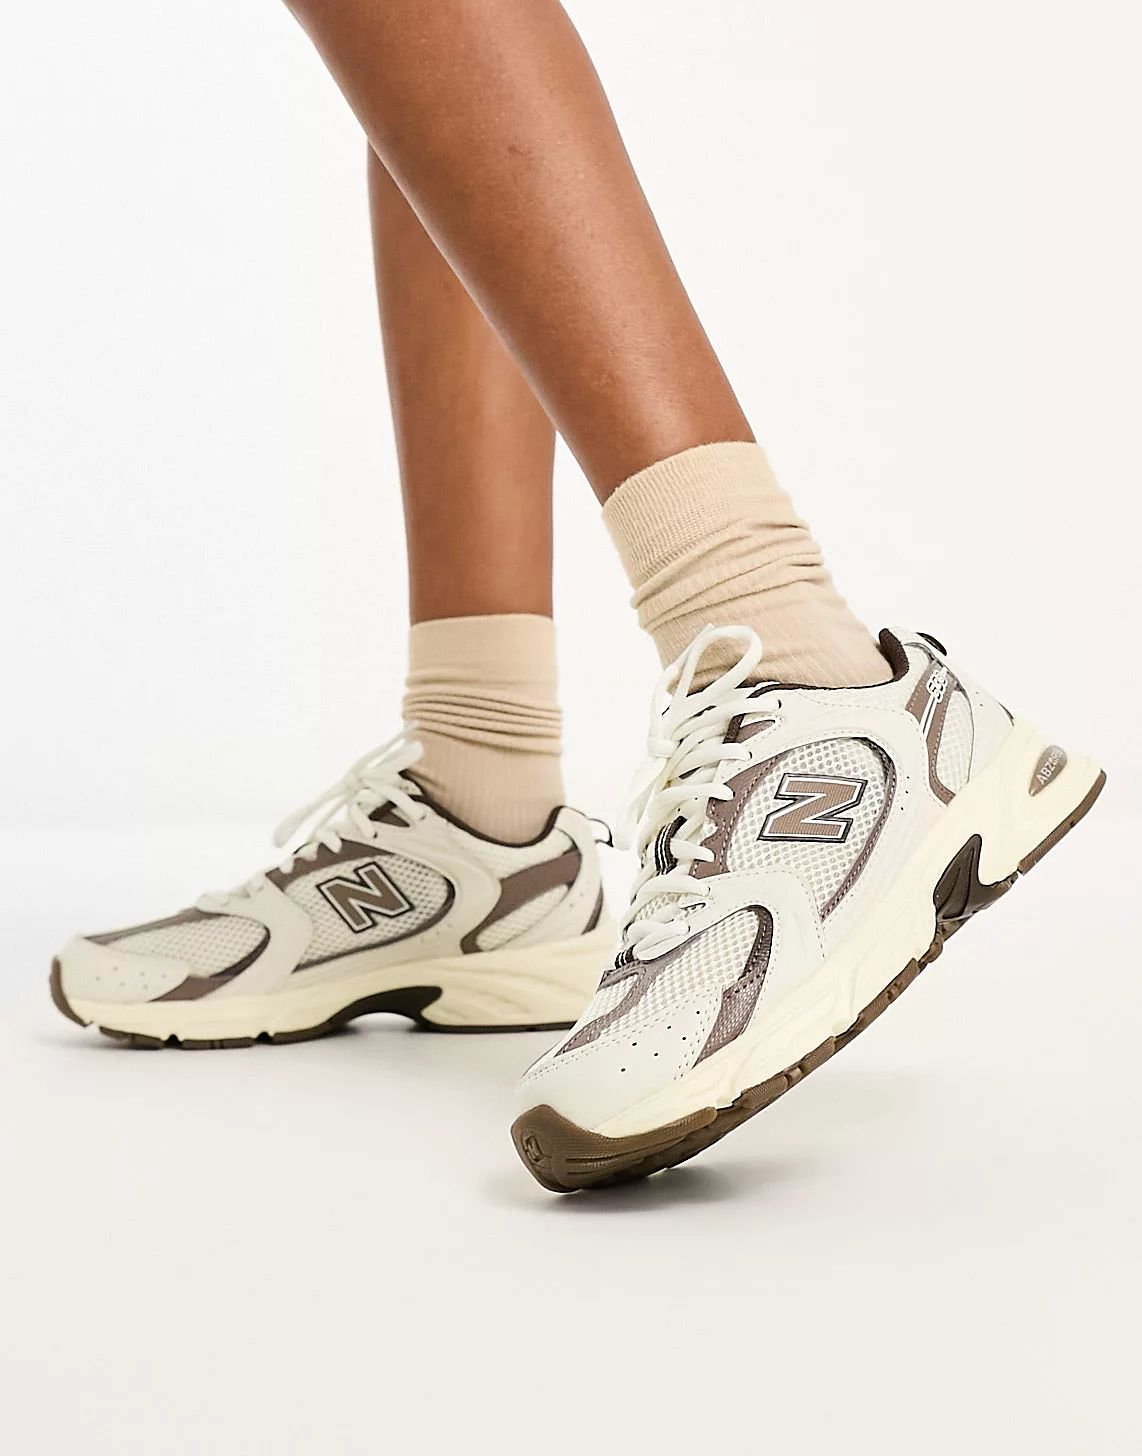 New Balance 530 sneakers in off white and beige - exclusive to ASOS - IVORY | ASOS (Global)